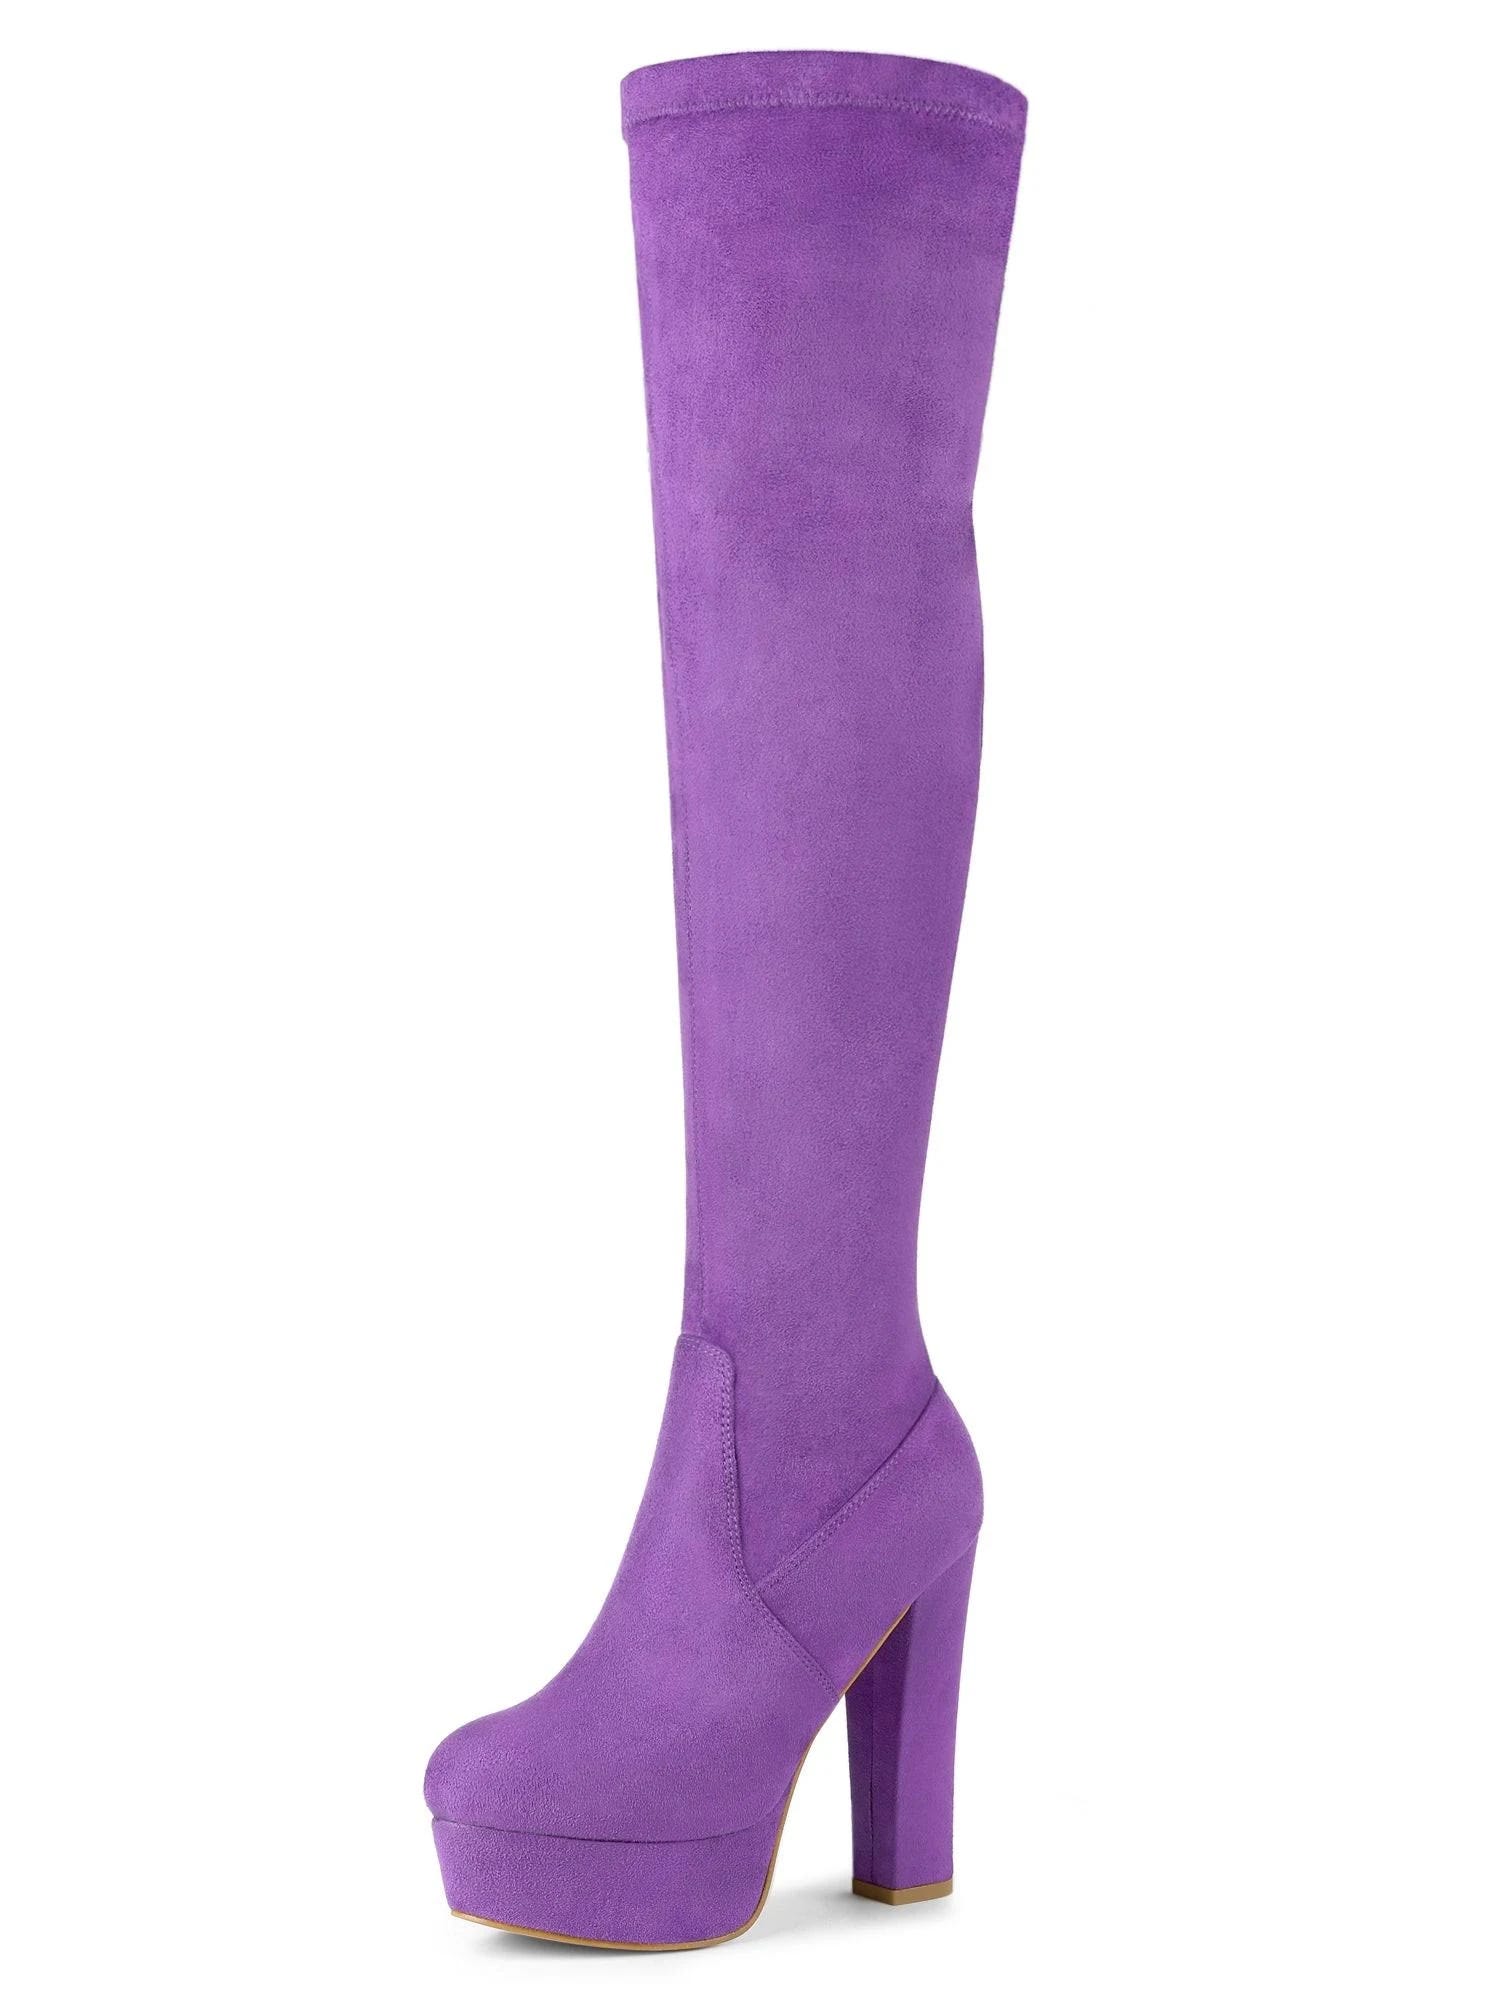 Fashionable Suede Thigh-High Boots in Lavender | Image